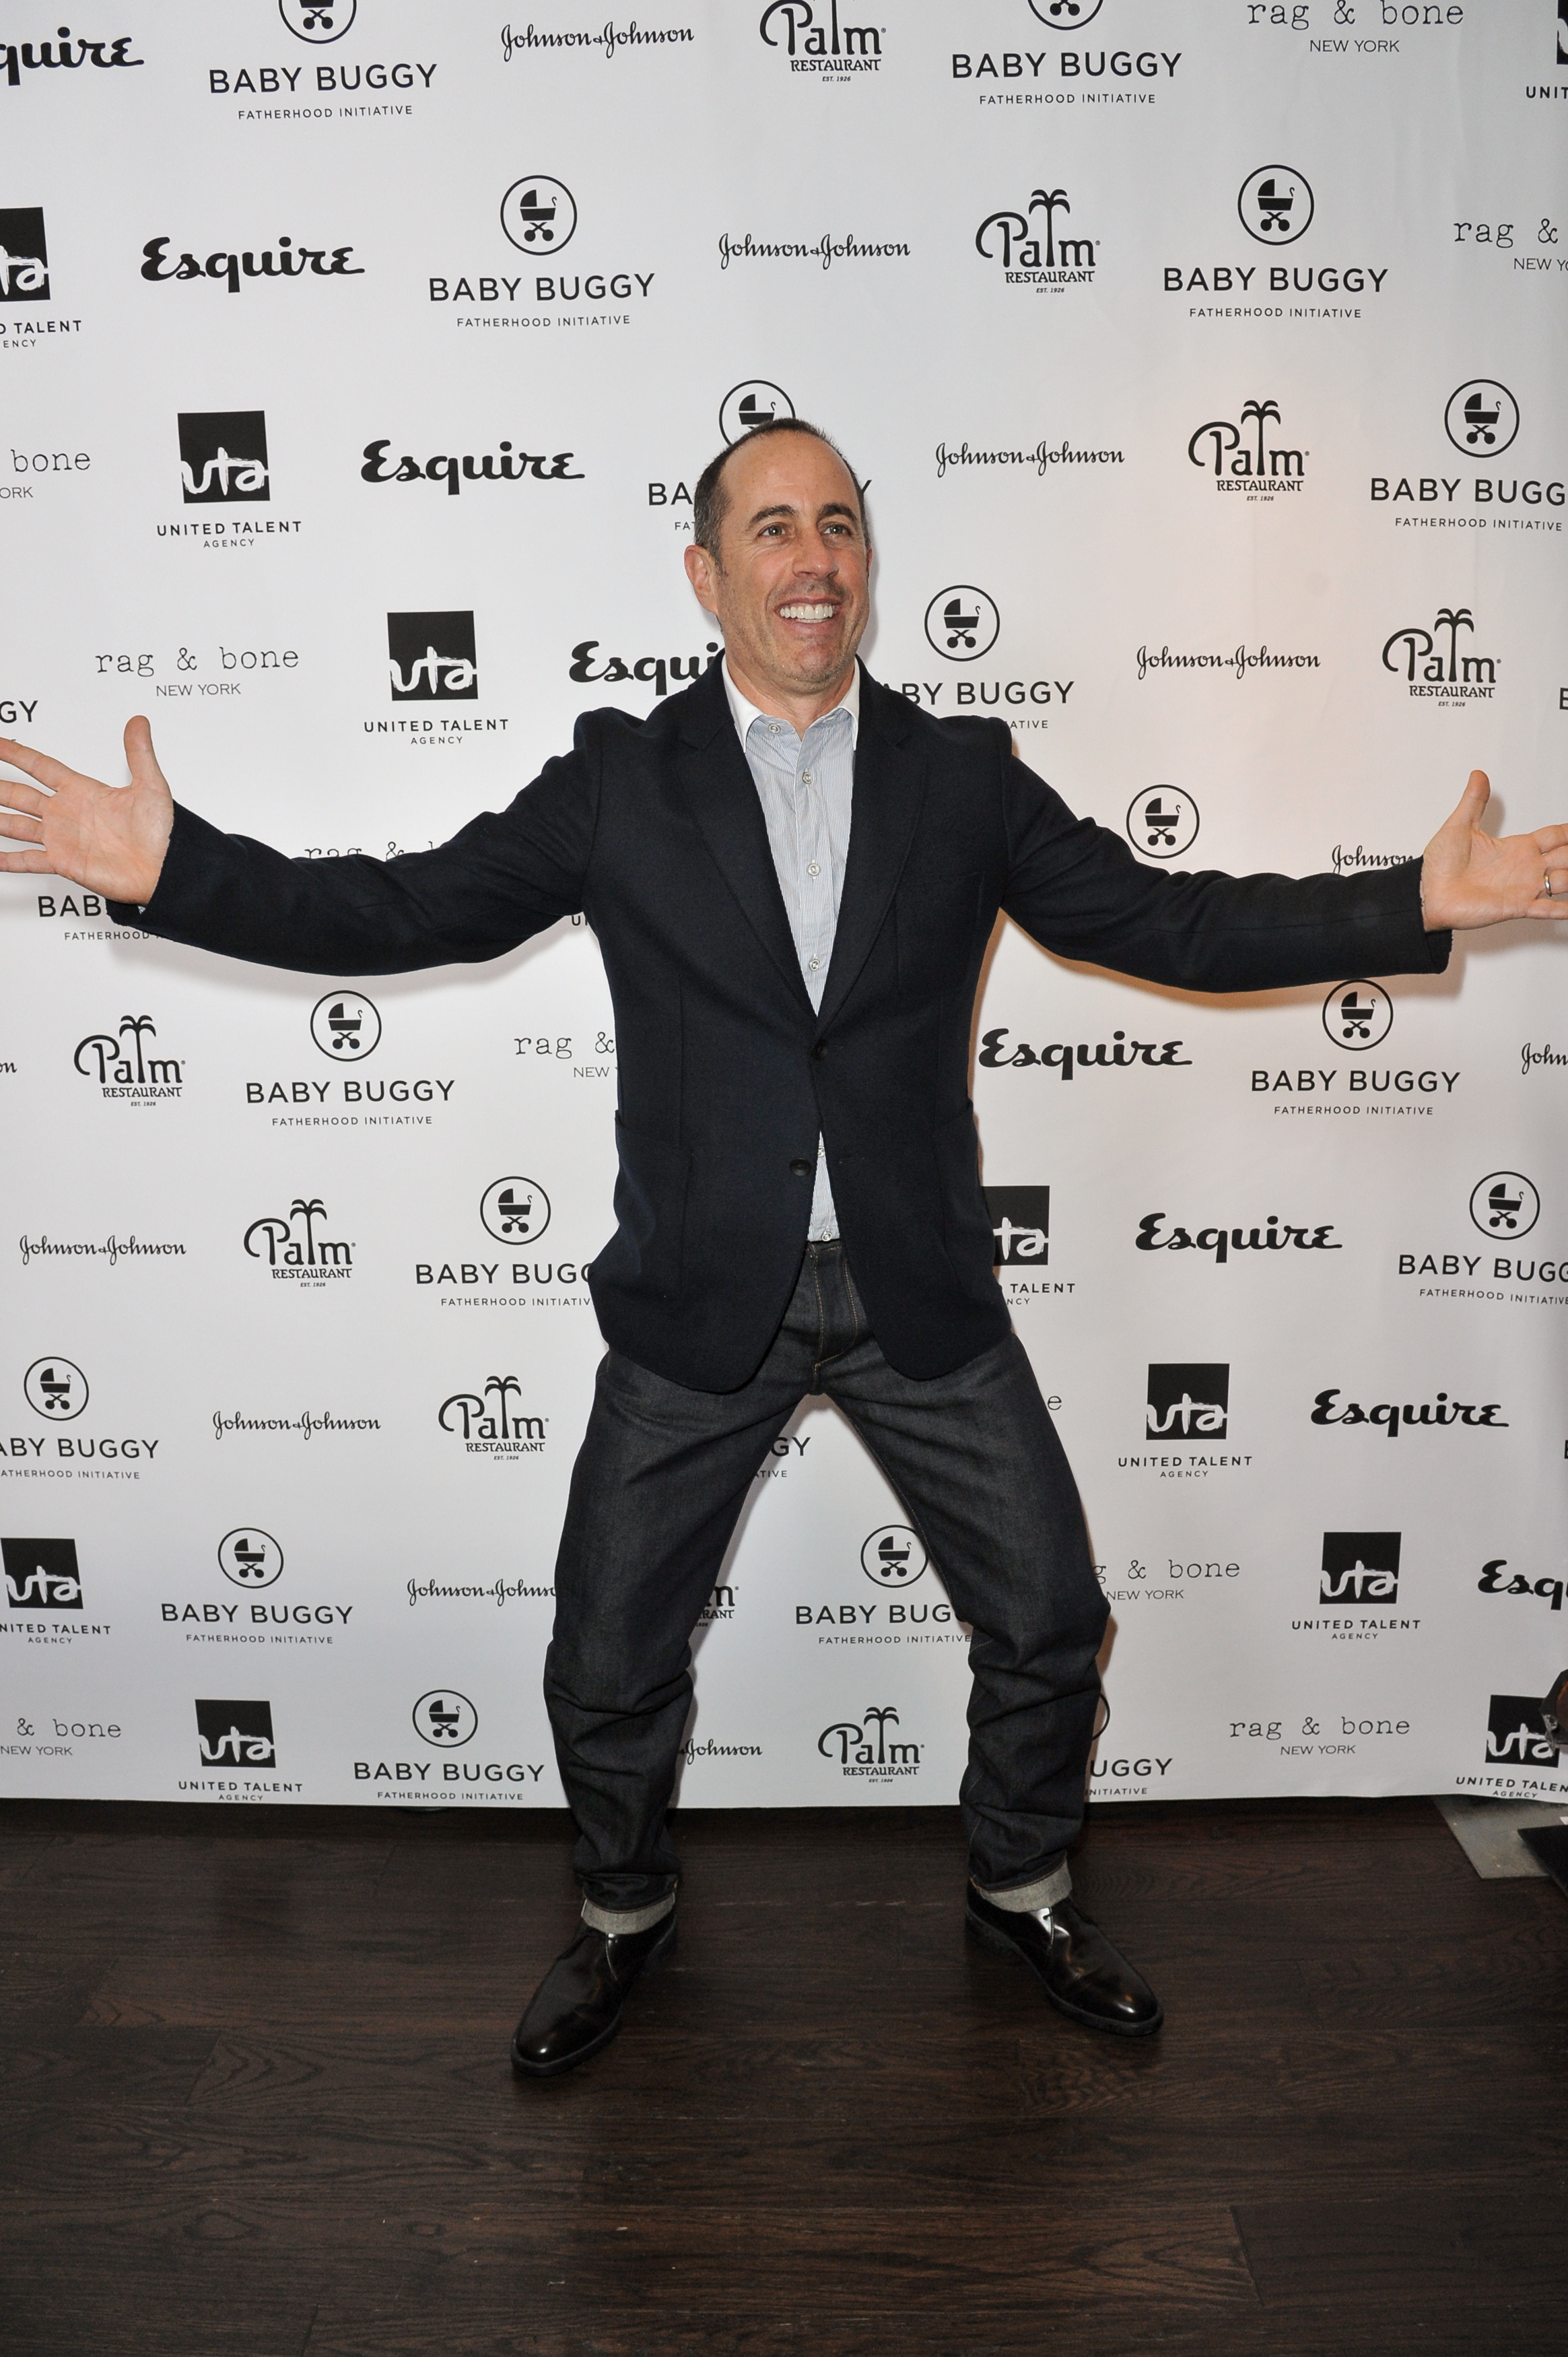 Jerry Seinfeld attends the Inaugural Los Angeles Baby Buggy Fatherhood Lunch at Palm Restaurant on Wednesday, March 4, 2015, in Beverly Hills, Calif. (Richard Shotwell—Invision/AP)